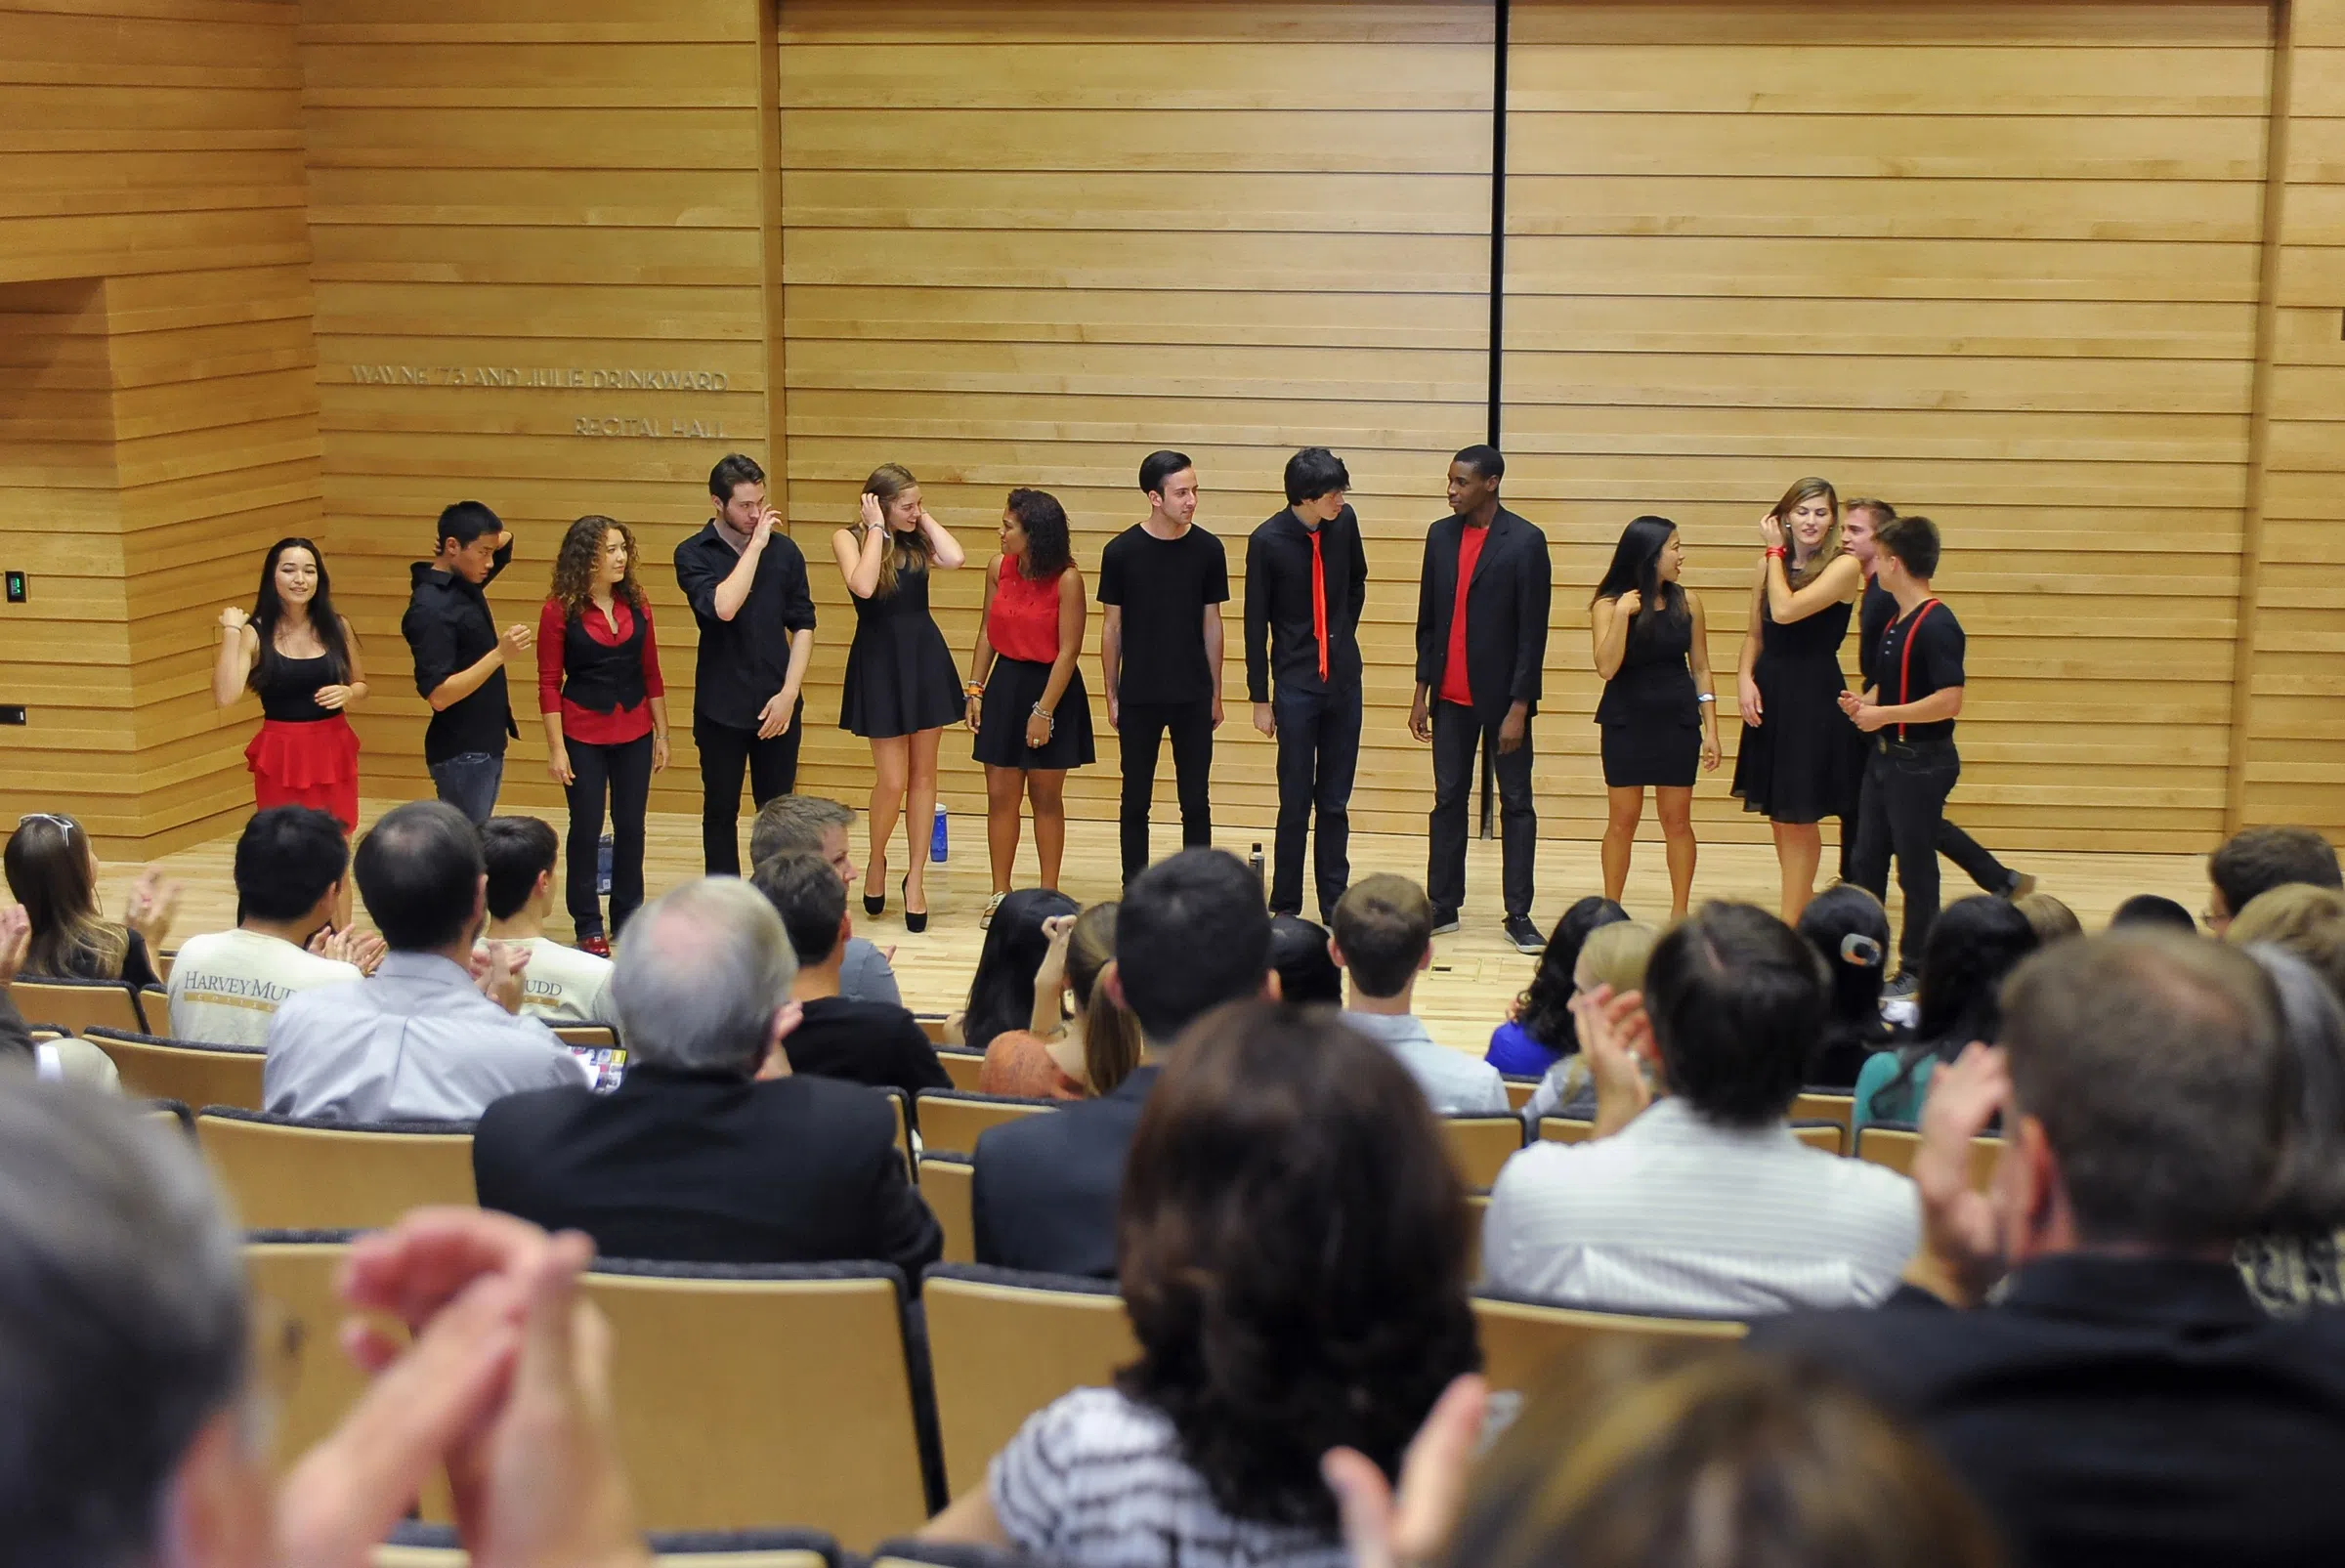 Students performing in recital hall